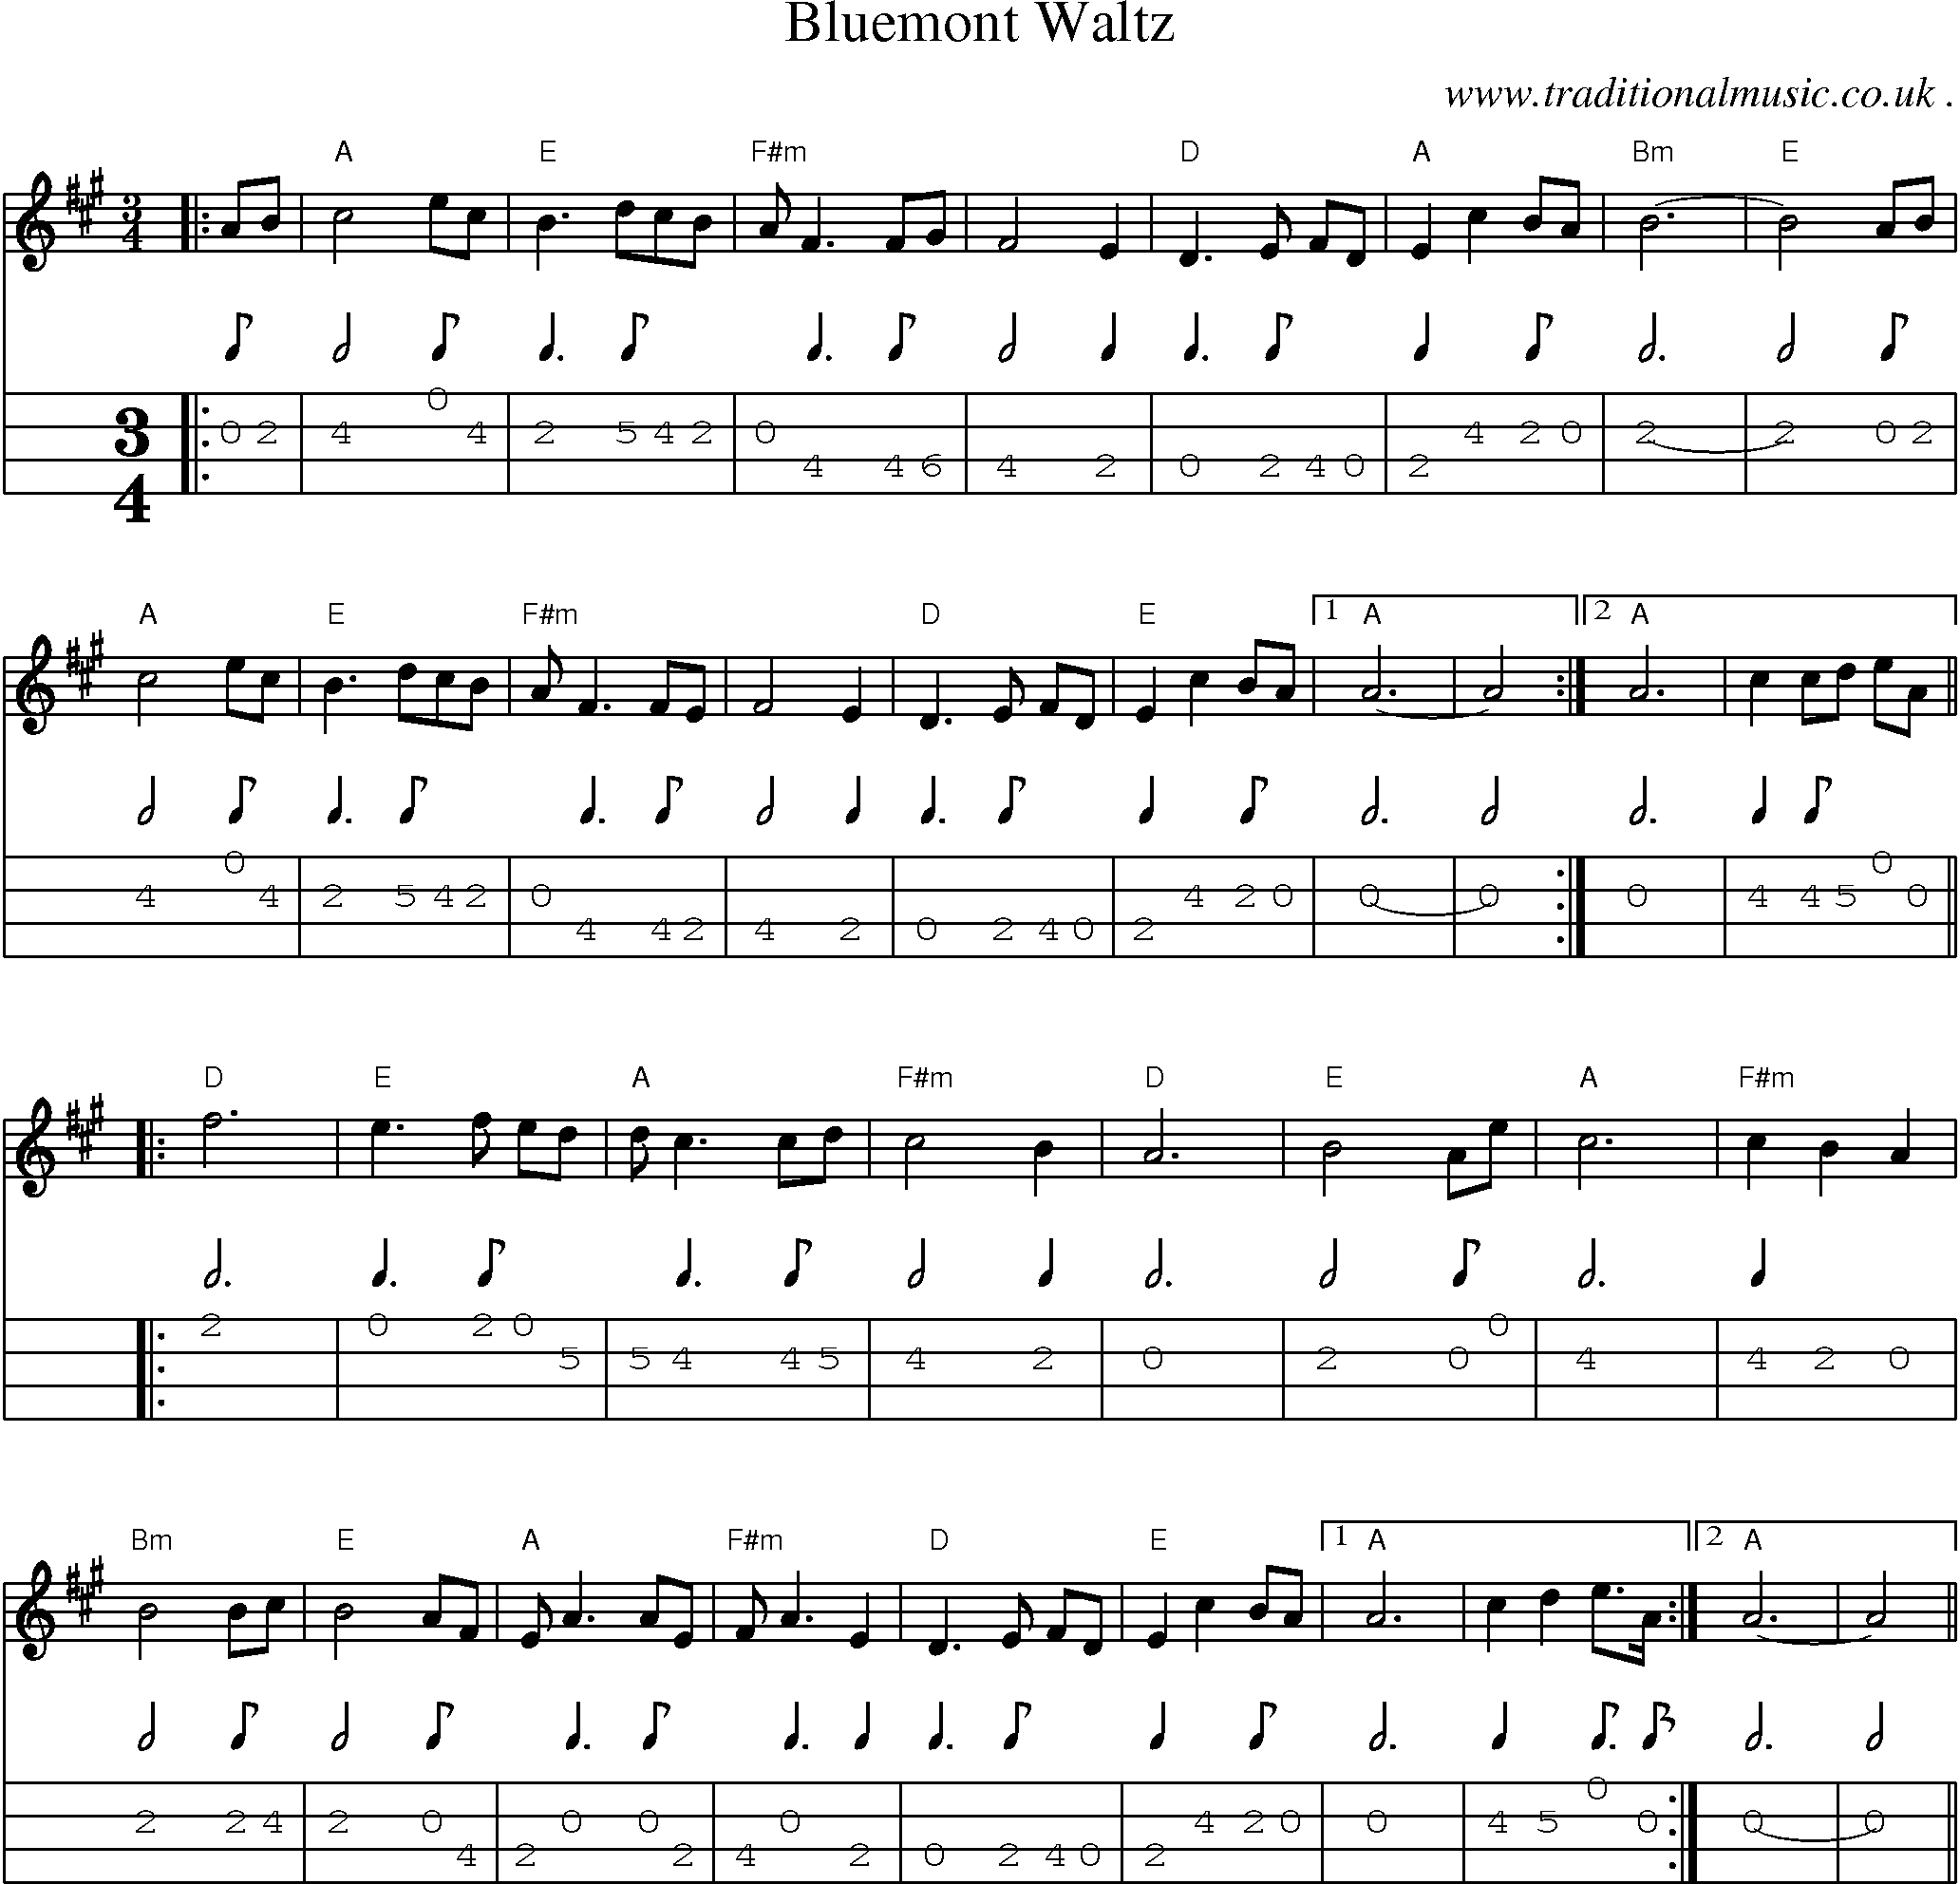 Music Score and Guitar Tabs for Bluemont Waltz